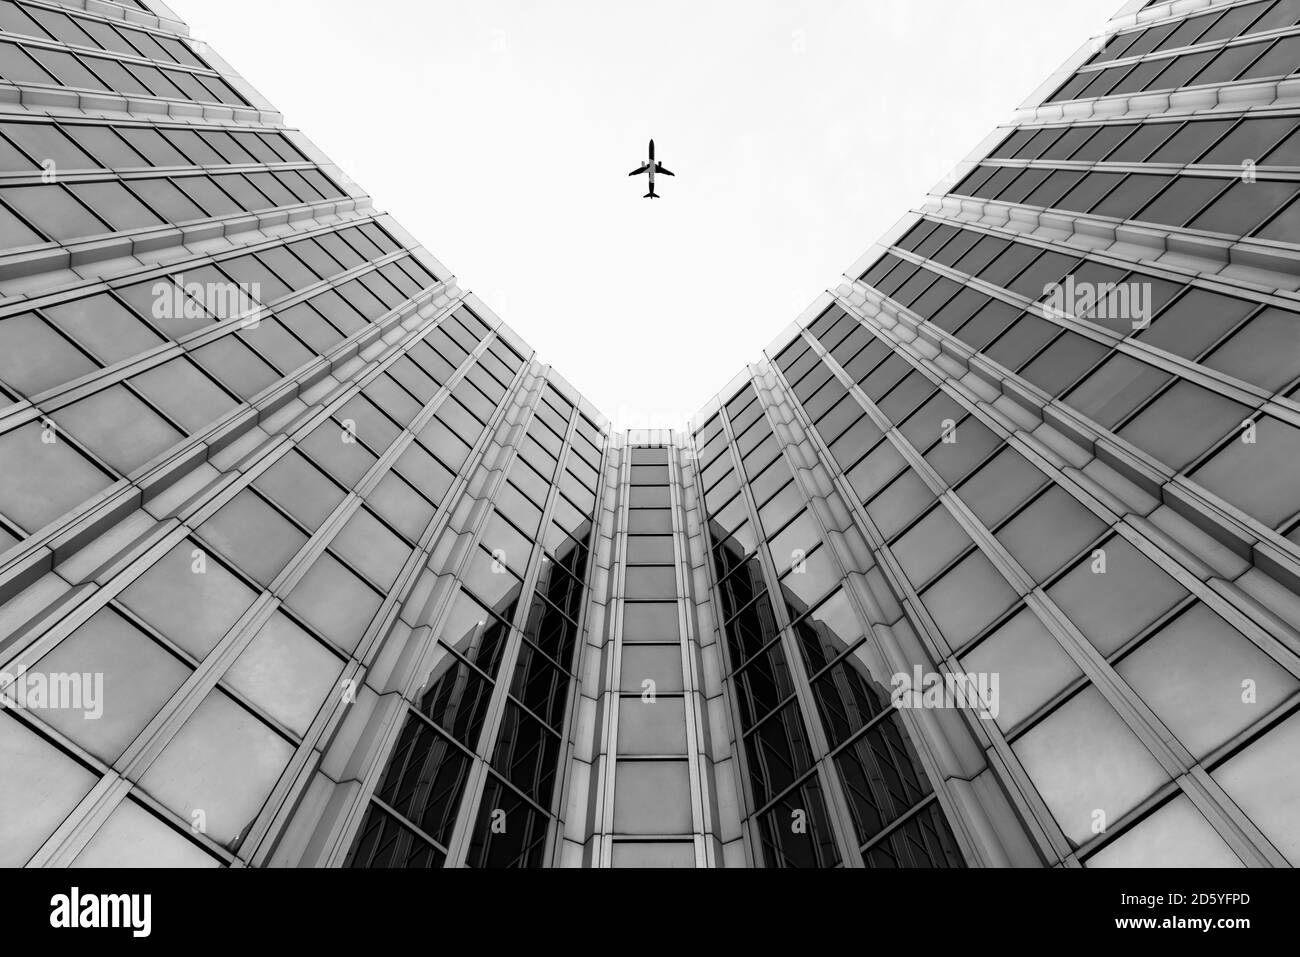 Germany, Duesseldorf, view to plane and facades of high-rise buildings from below Stock Photo